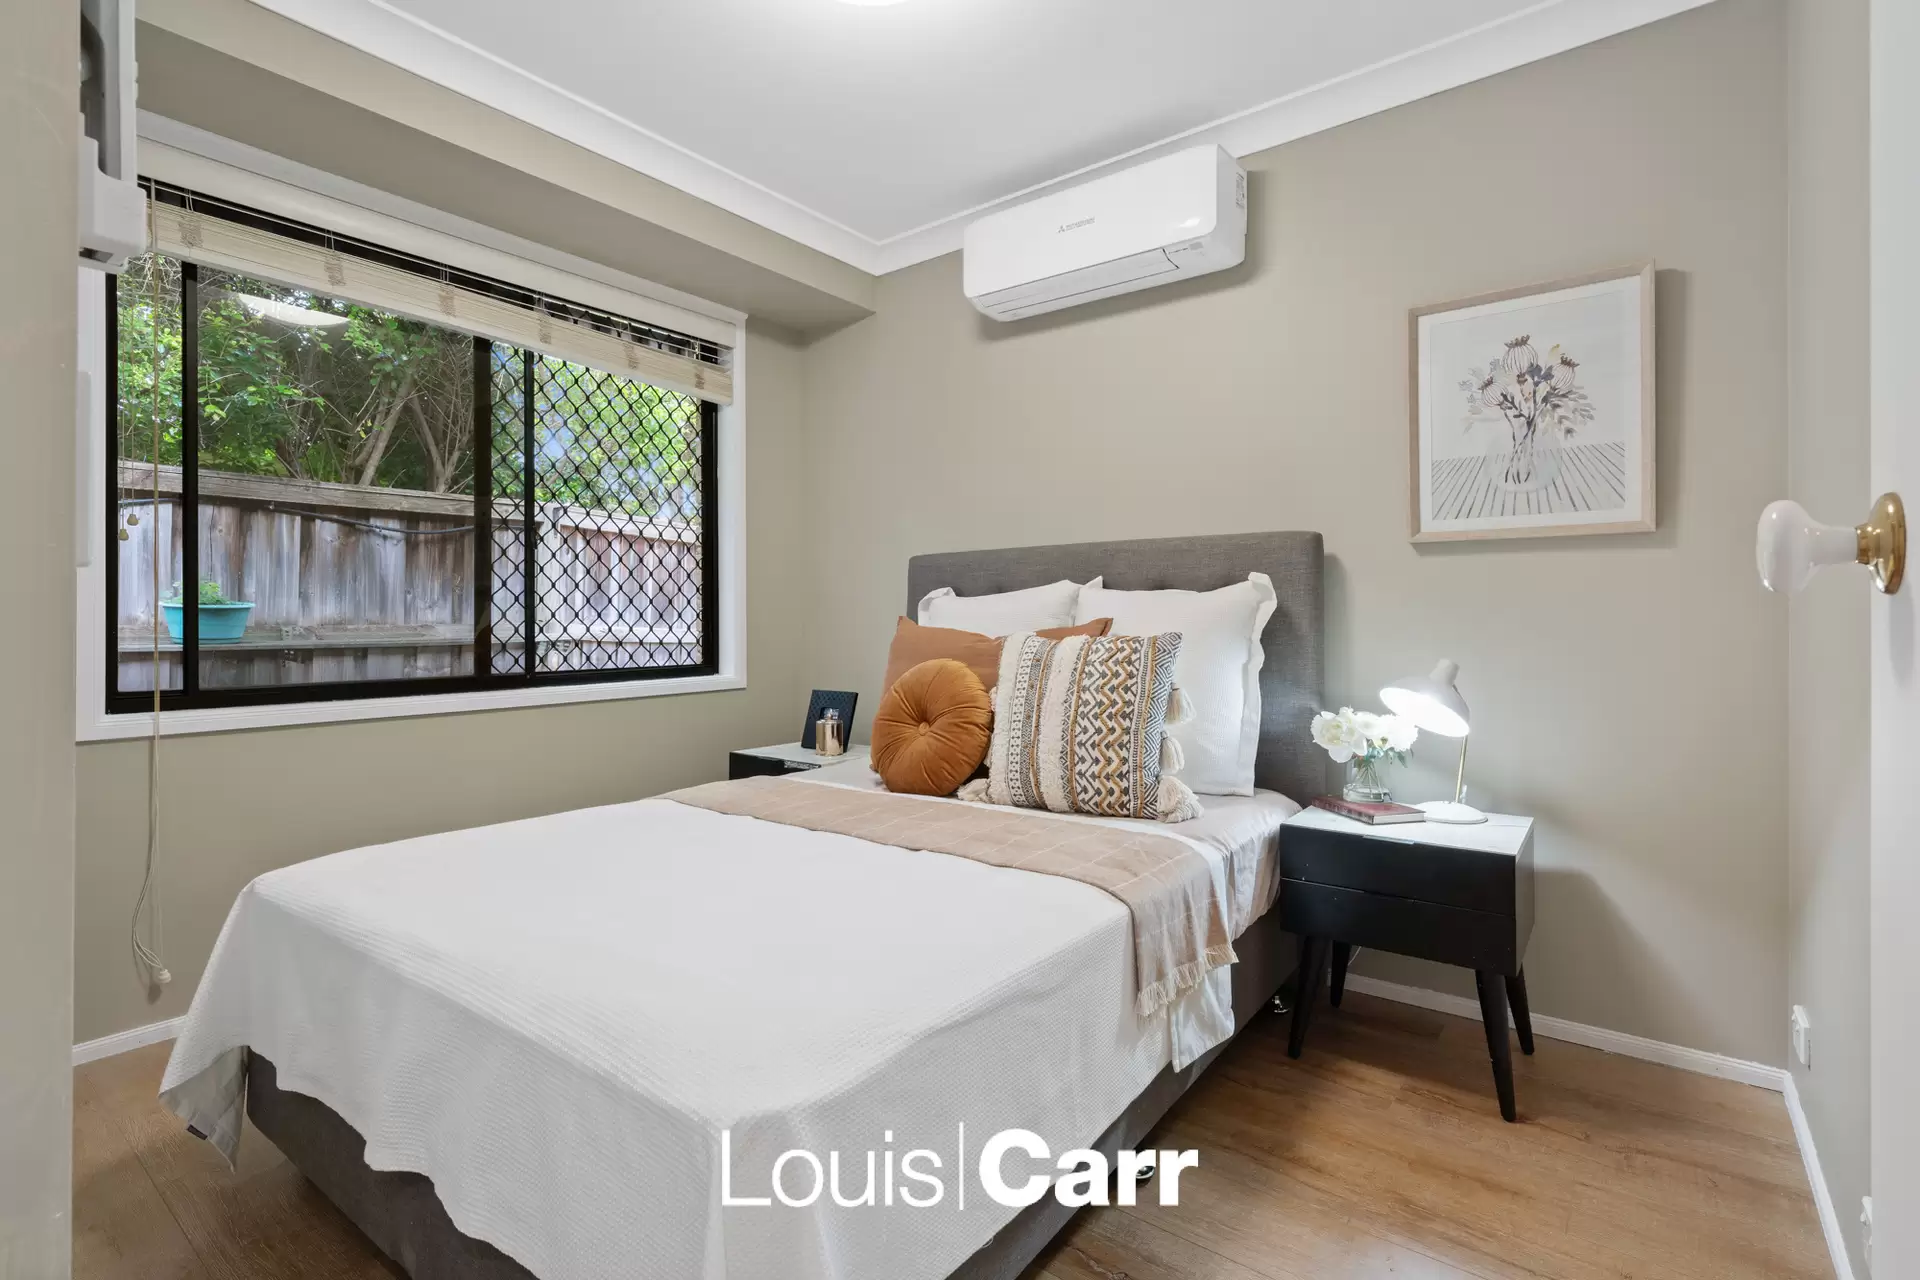 Photo #17: 33 Marsden Avenue, Kellyville - For Sale by Louis Carr Real Estate